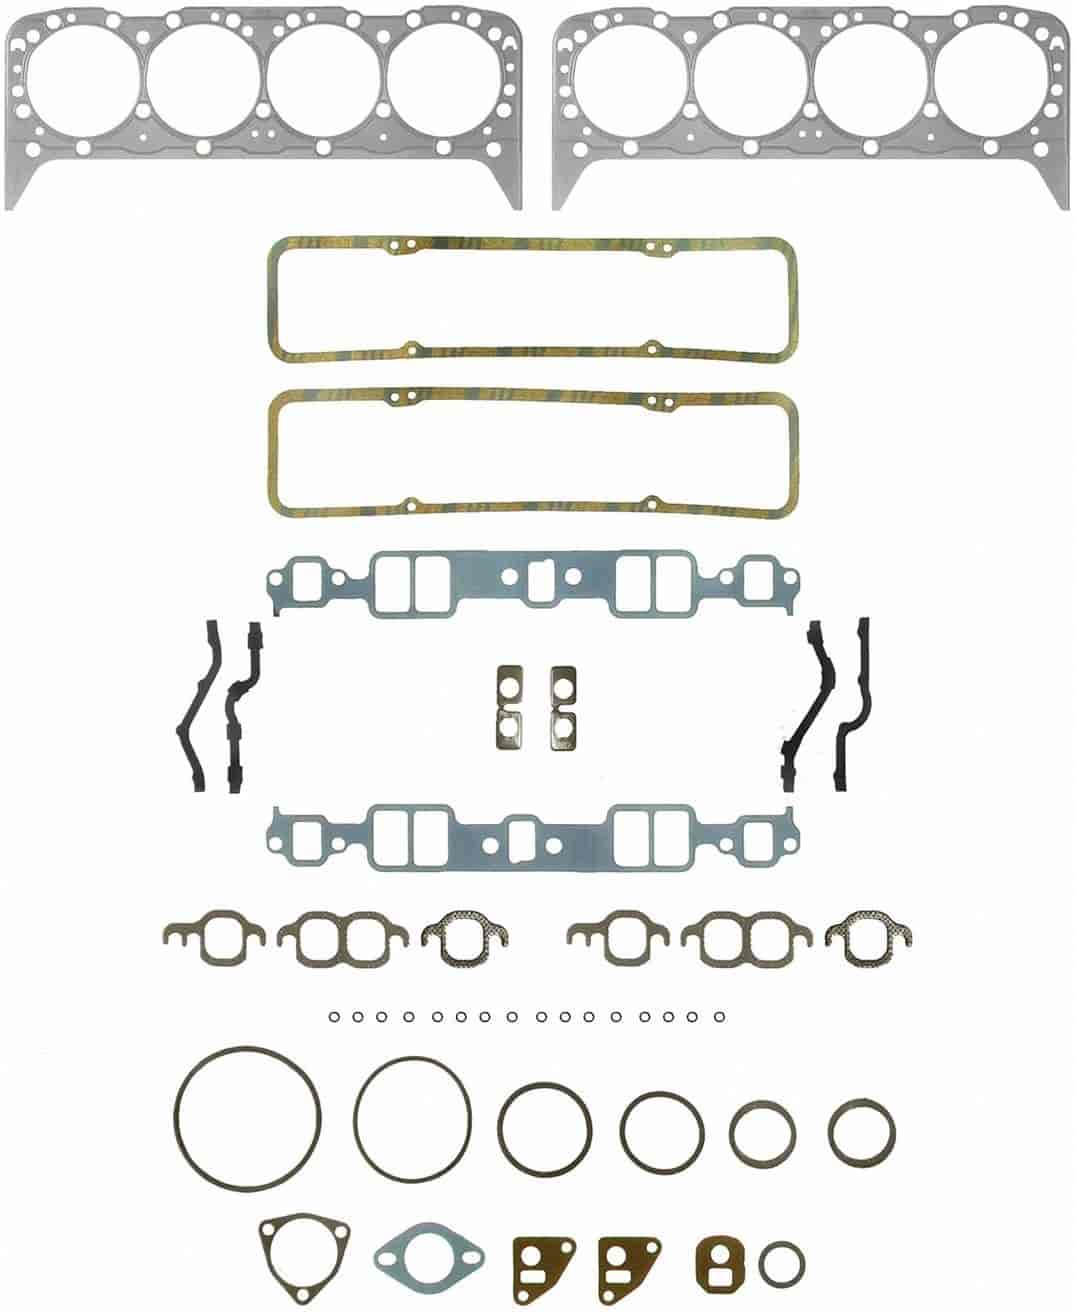 HS7733SH2 Cylinder Head Gasket Set for 1957-1976 Chevy Small Block Engines